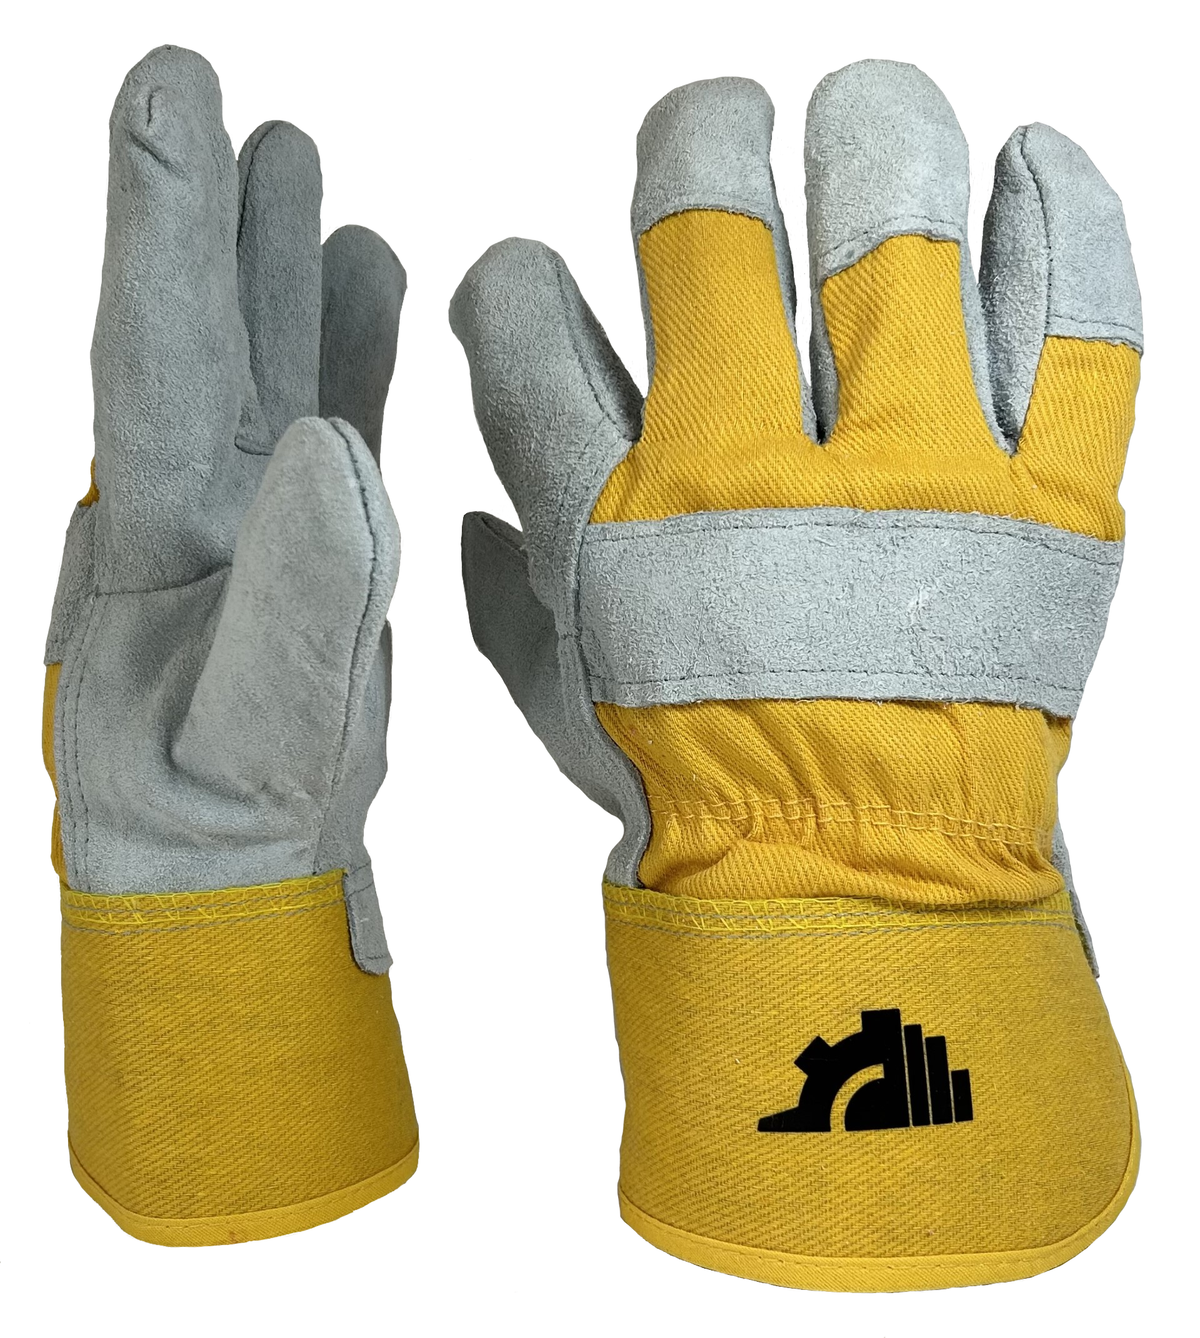 Best Prices Available Superior Puncture Resistant Gloves SSXDSFN - Dyneema  with Dynastop Lined Nitrile Palm, knife resistant gloves